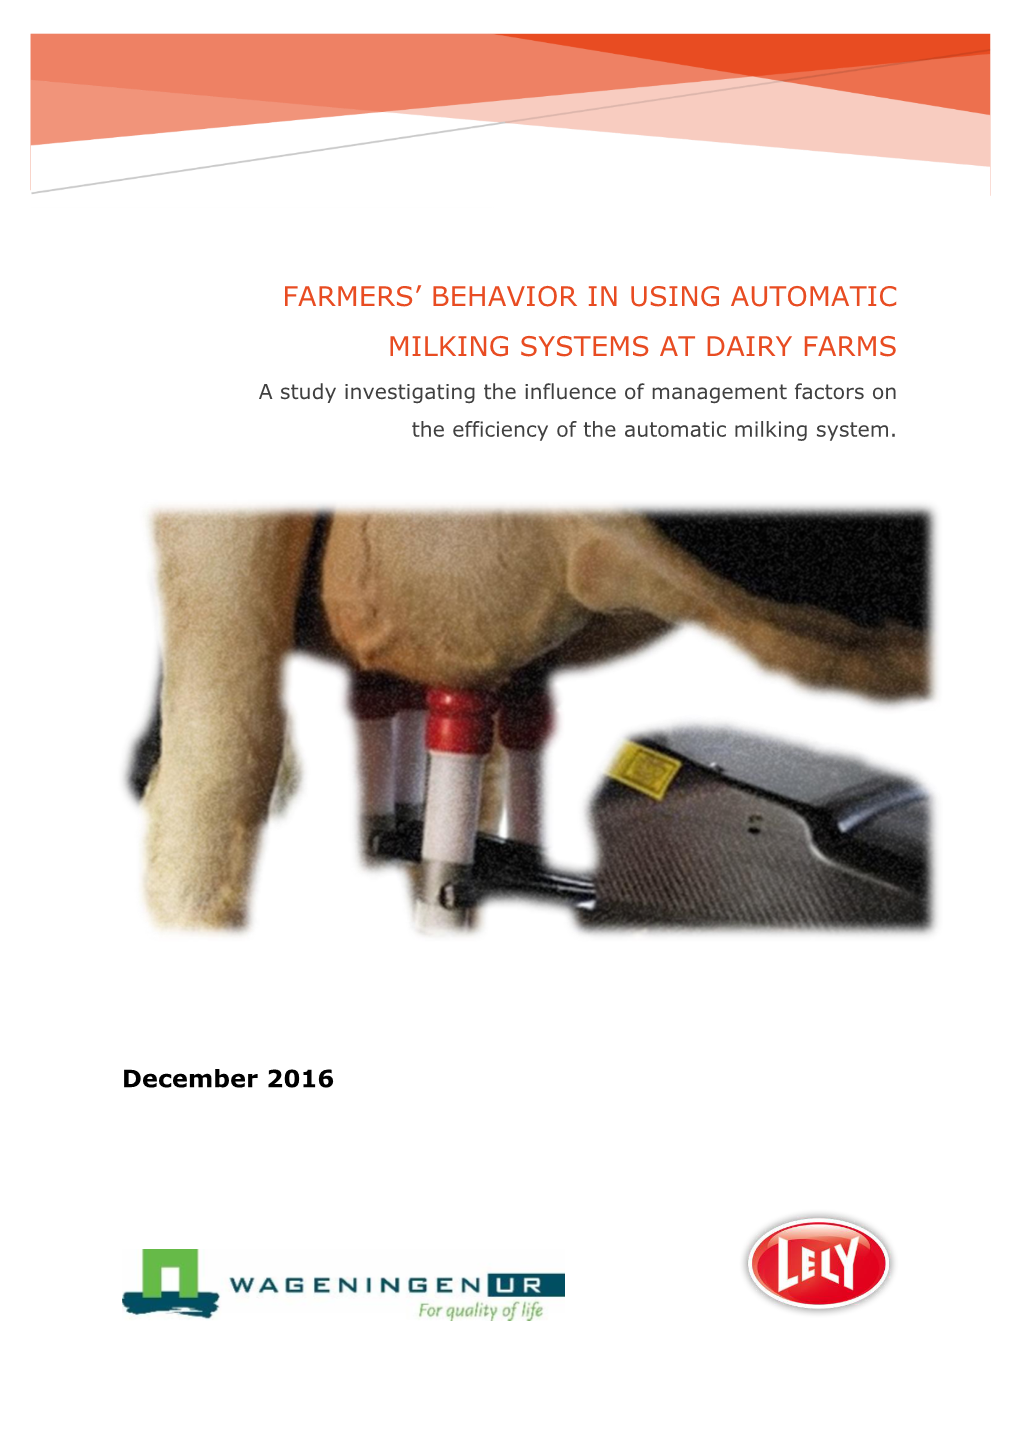 Farmers' Behavior in Using Automatic Milking Systems at Dairy Farms